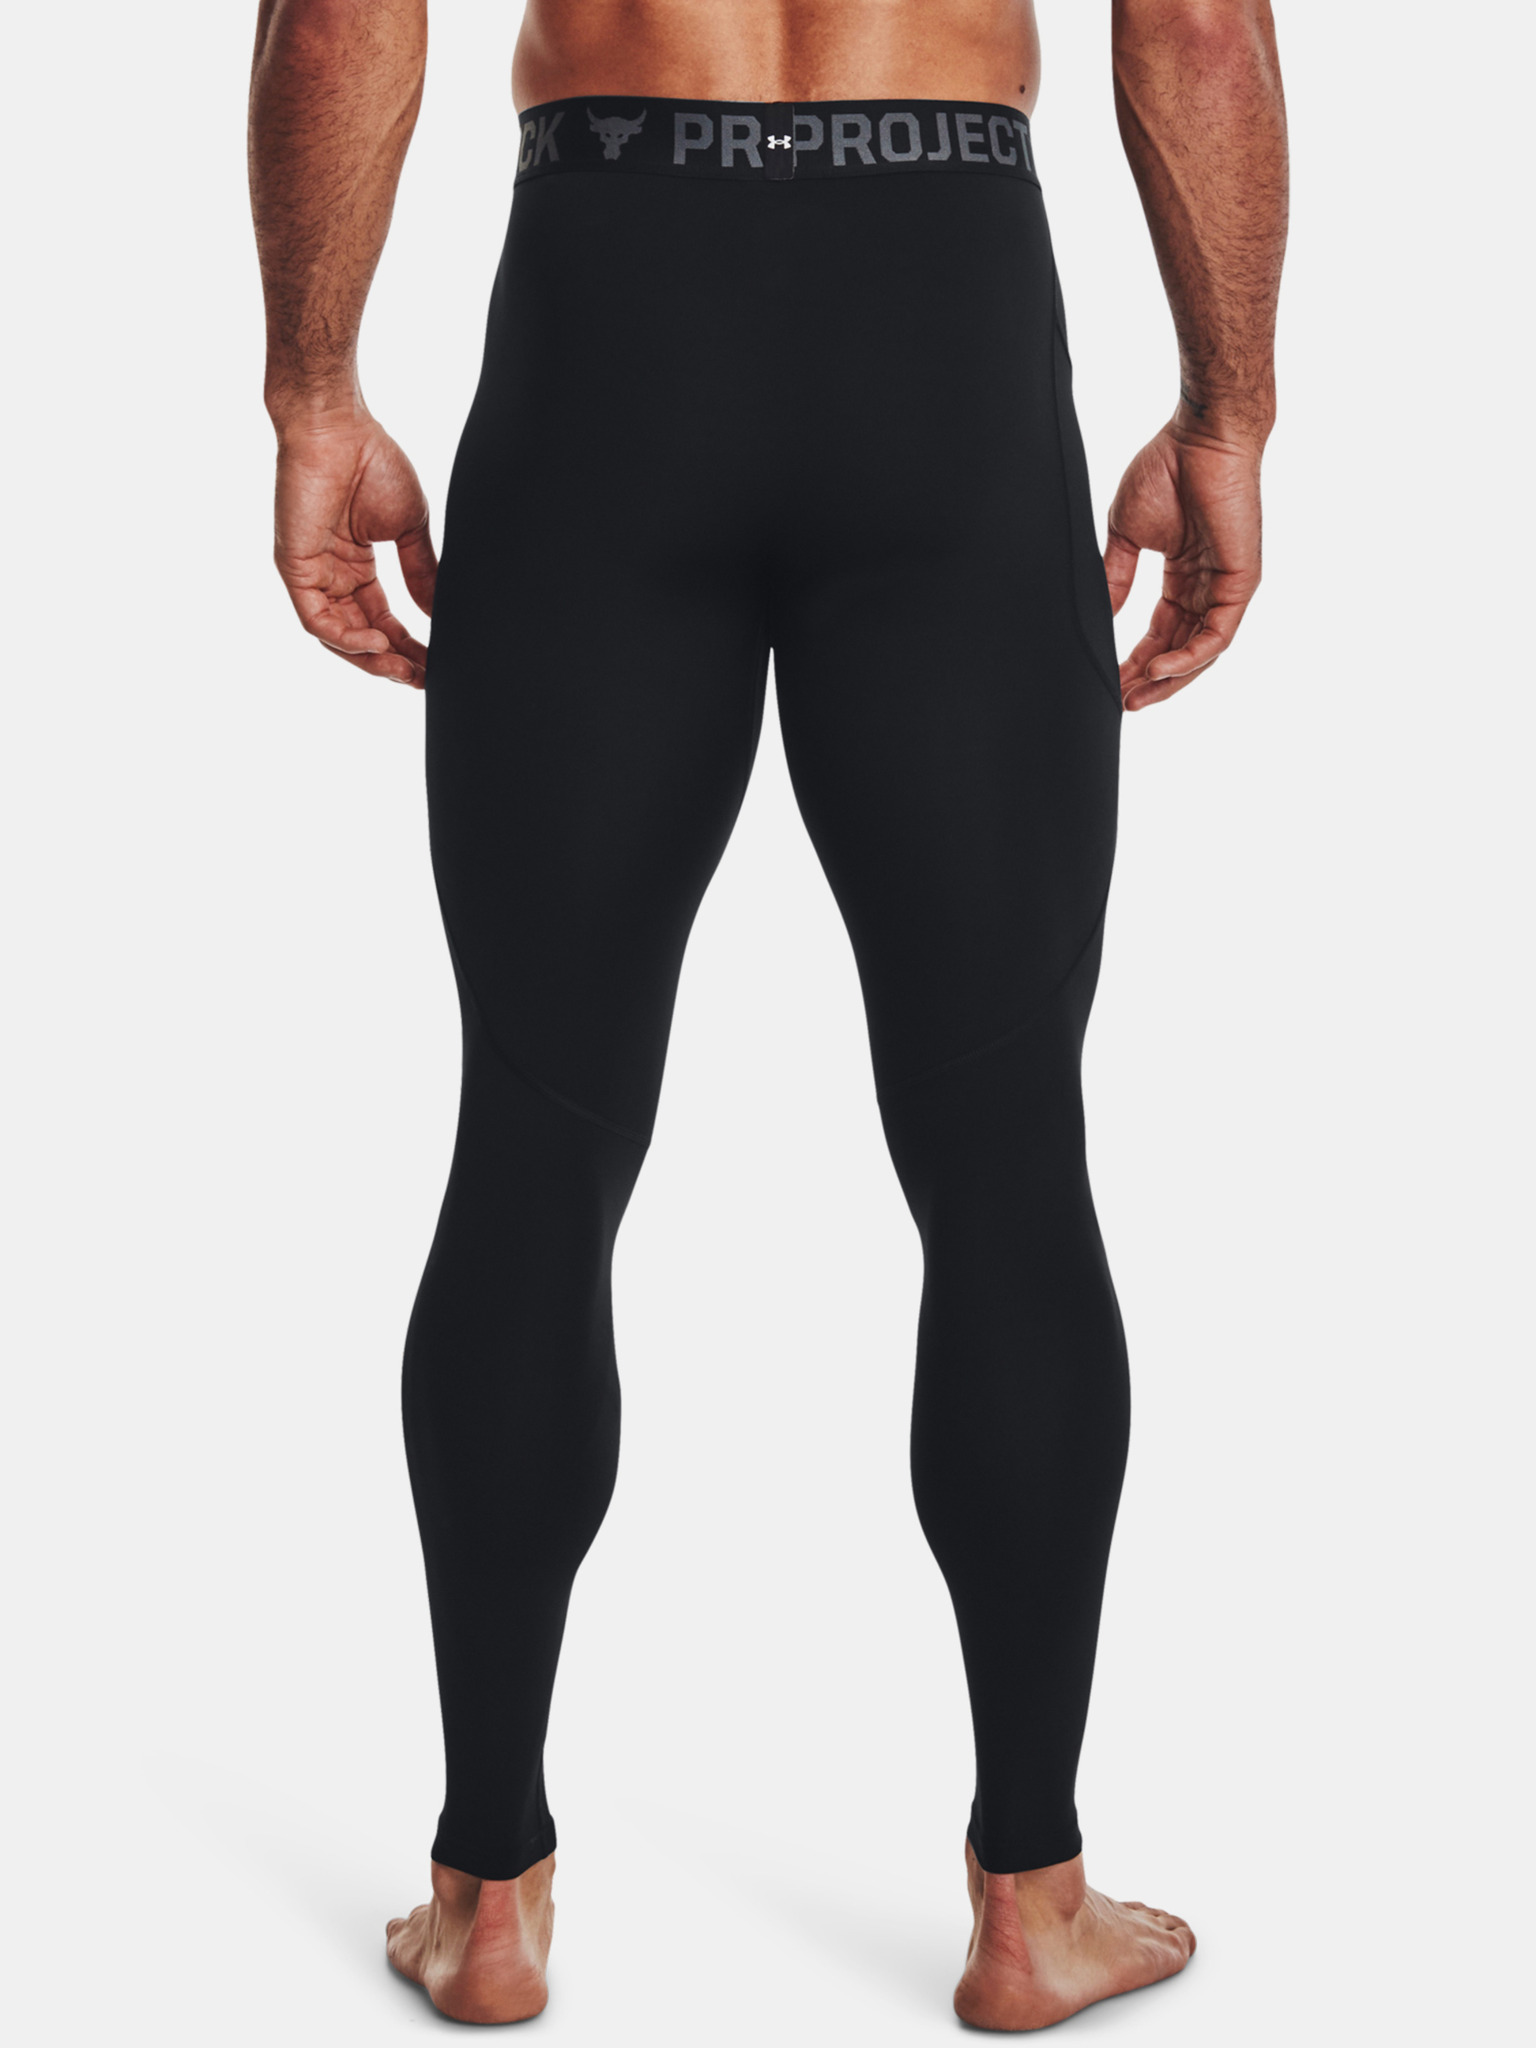 UNDER ARMOUR Men's Project Rock Seamless Compression Leggings NWT SIZE: 3XL